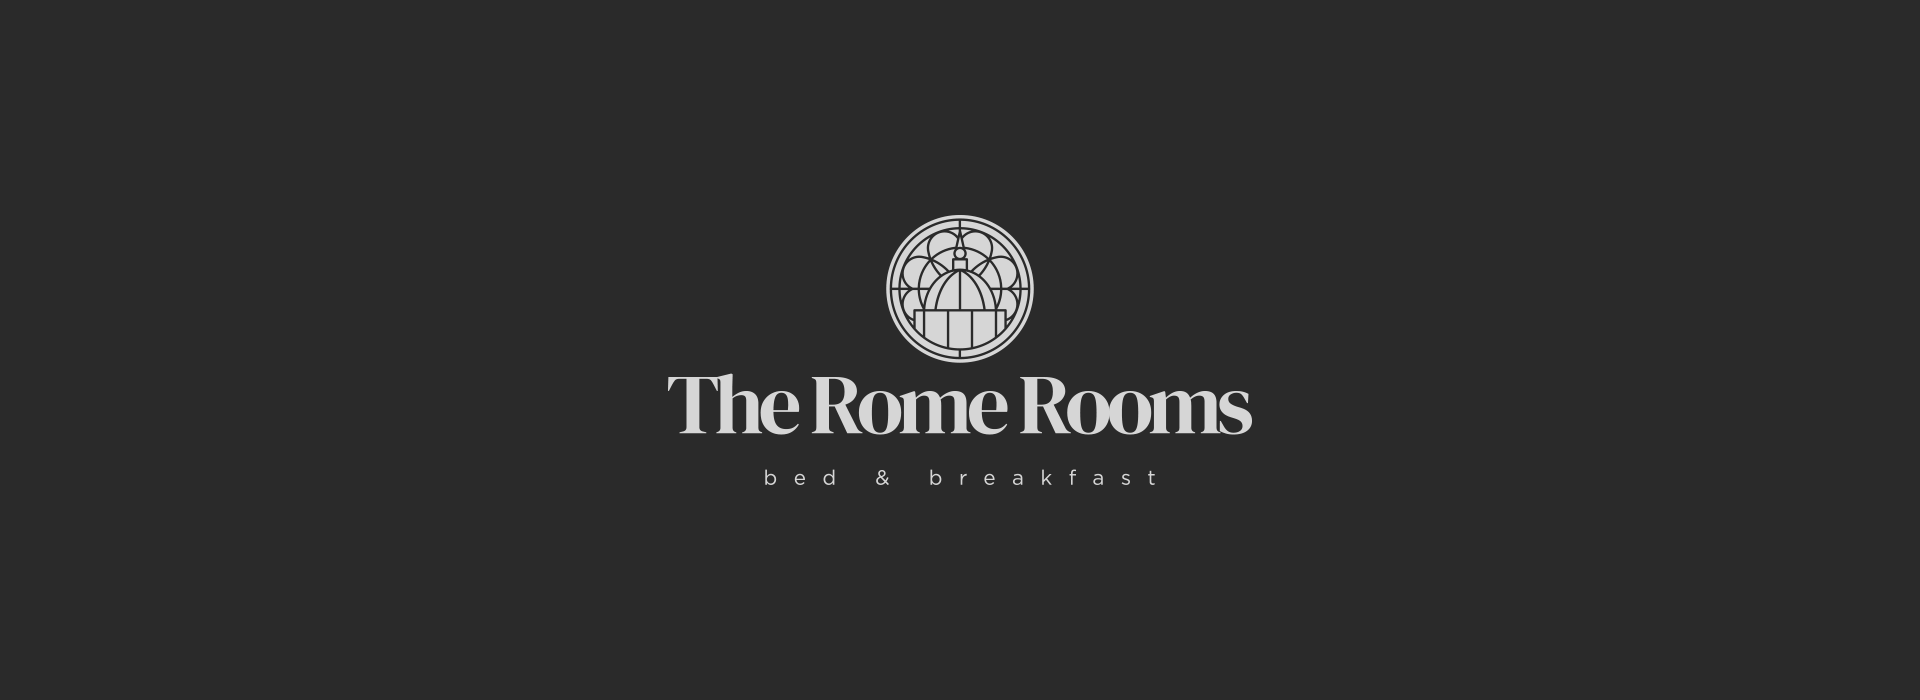 The Rome rooms